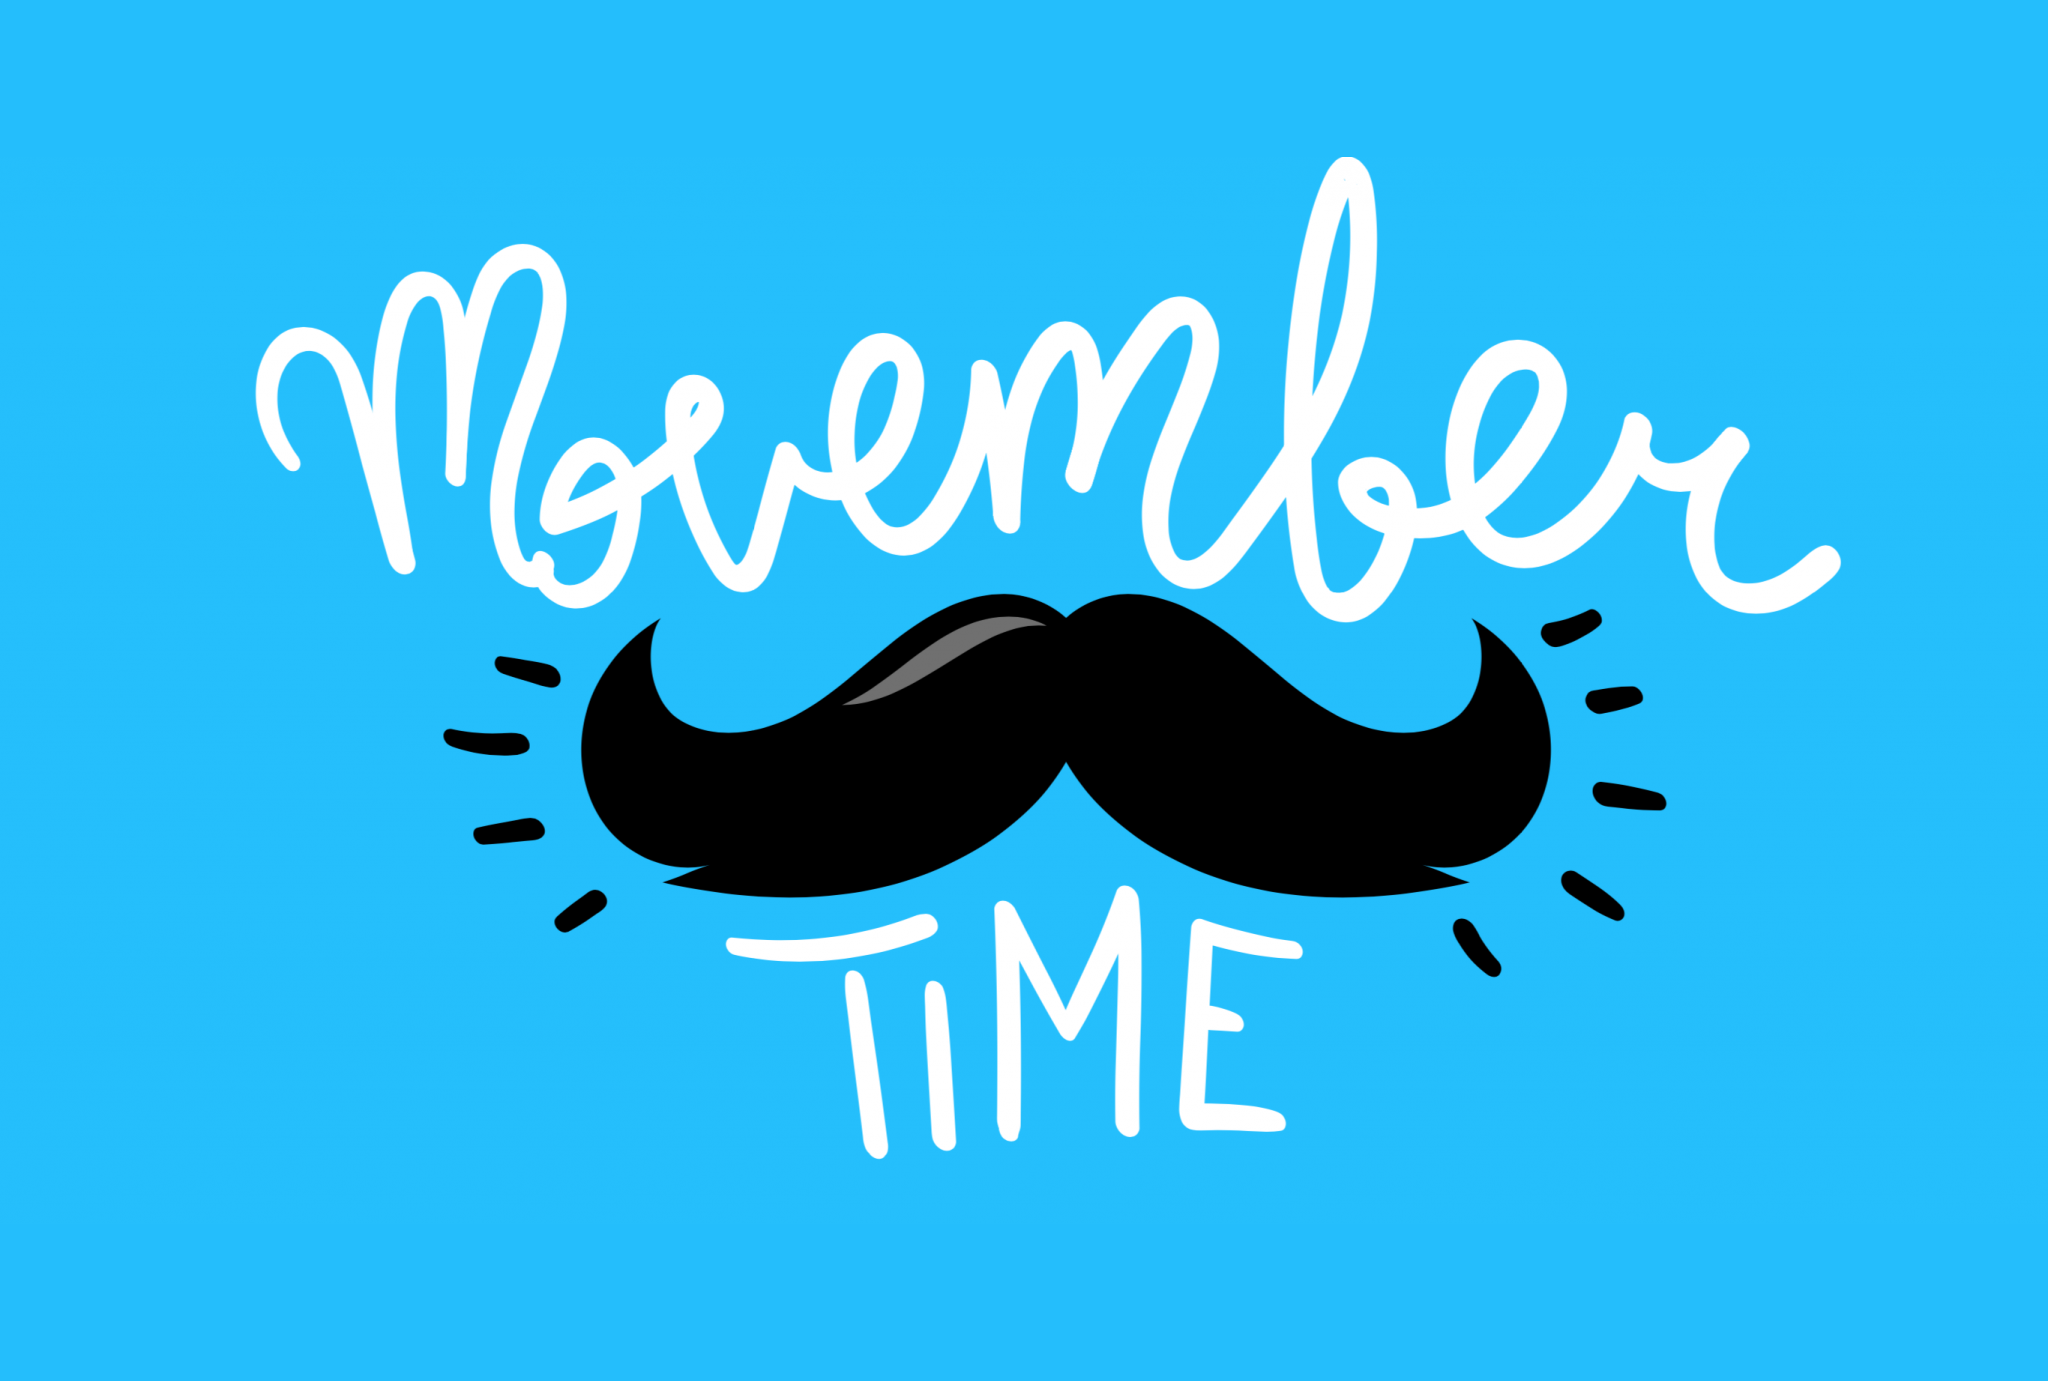 movember time